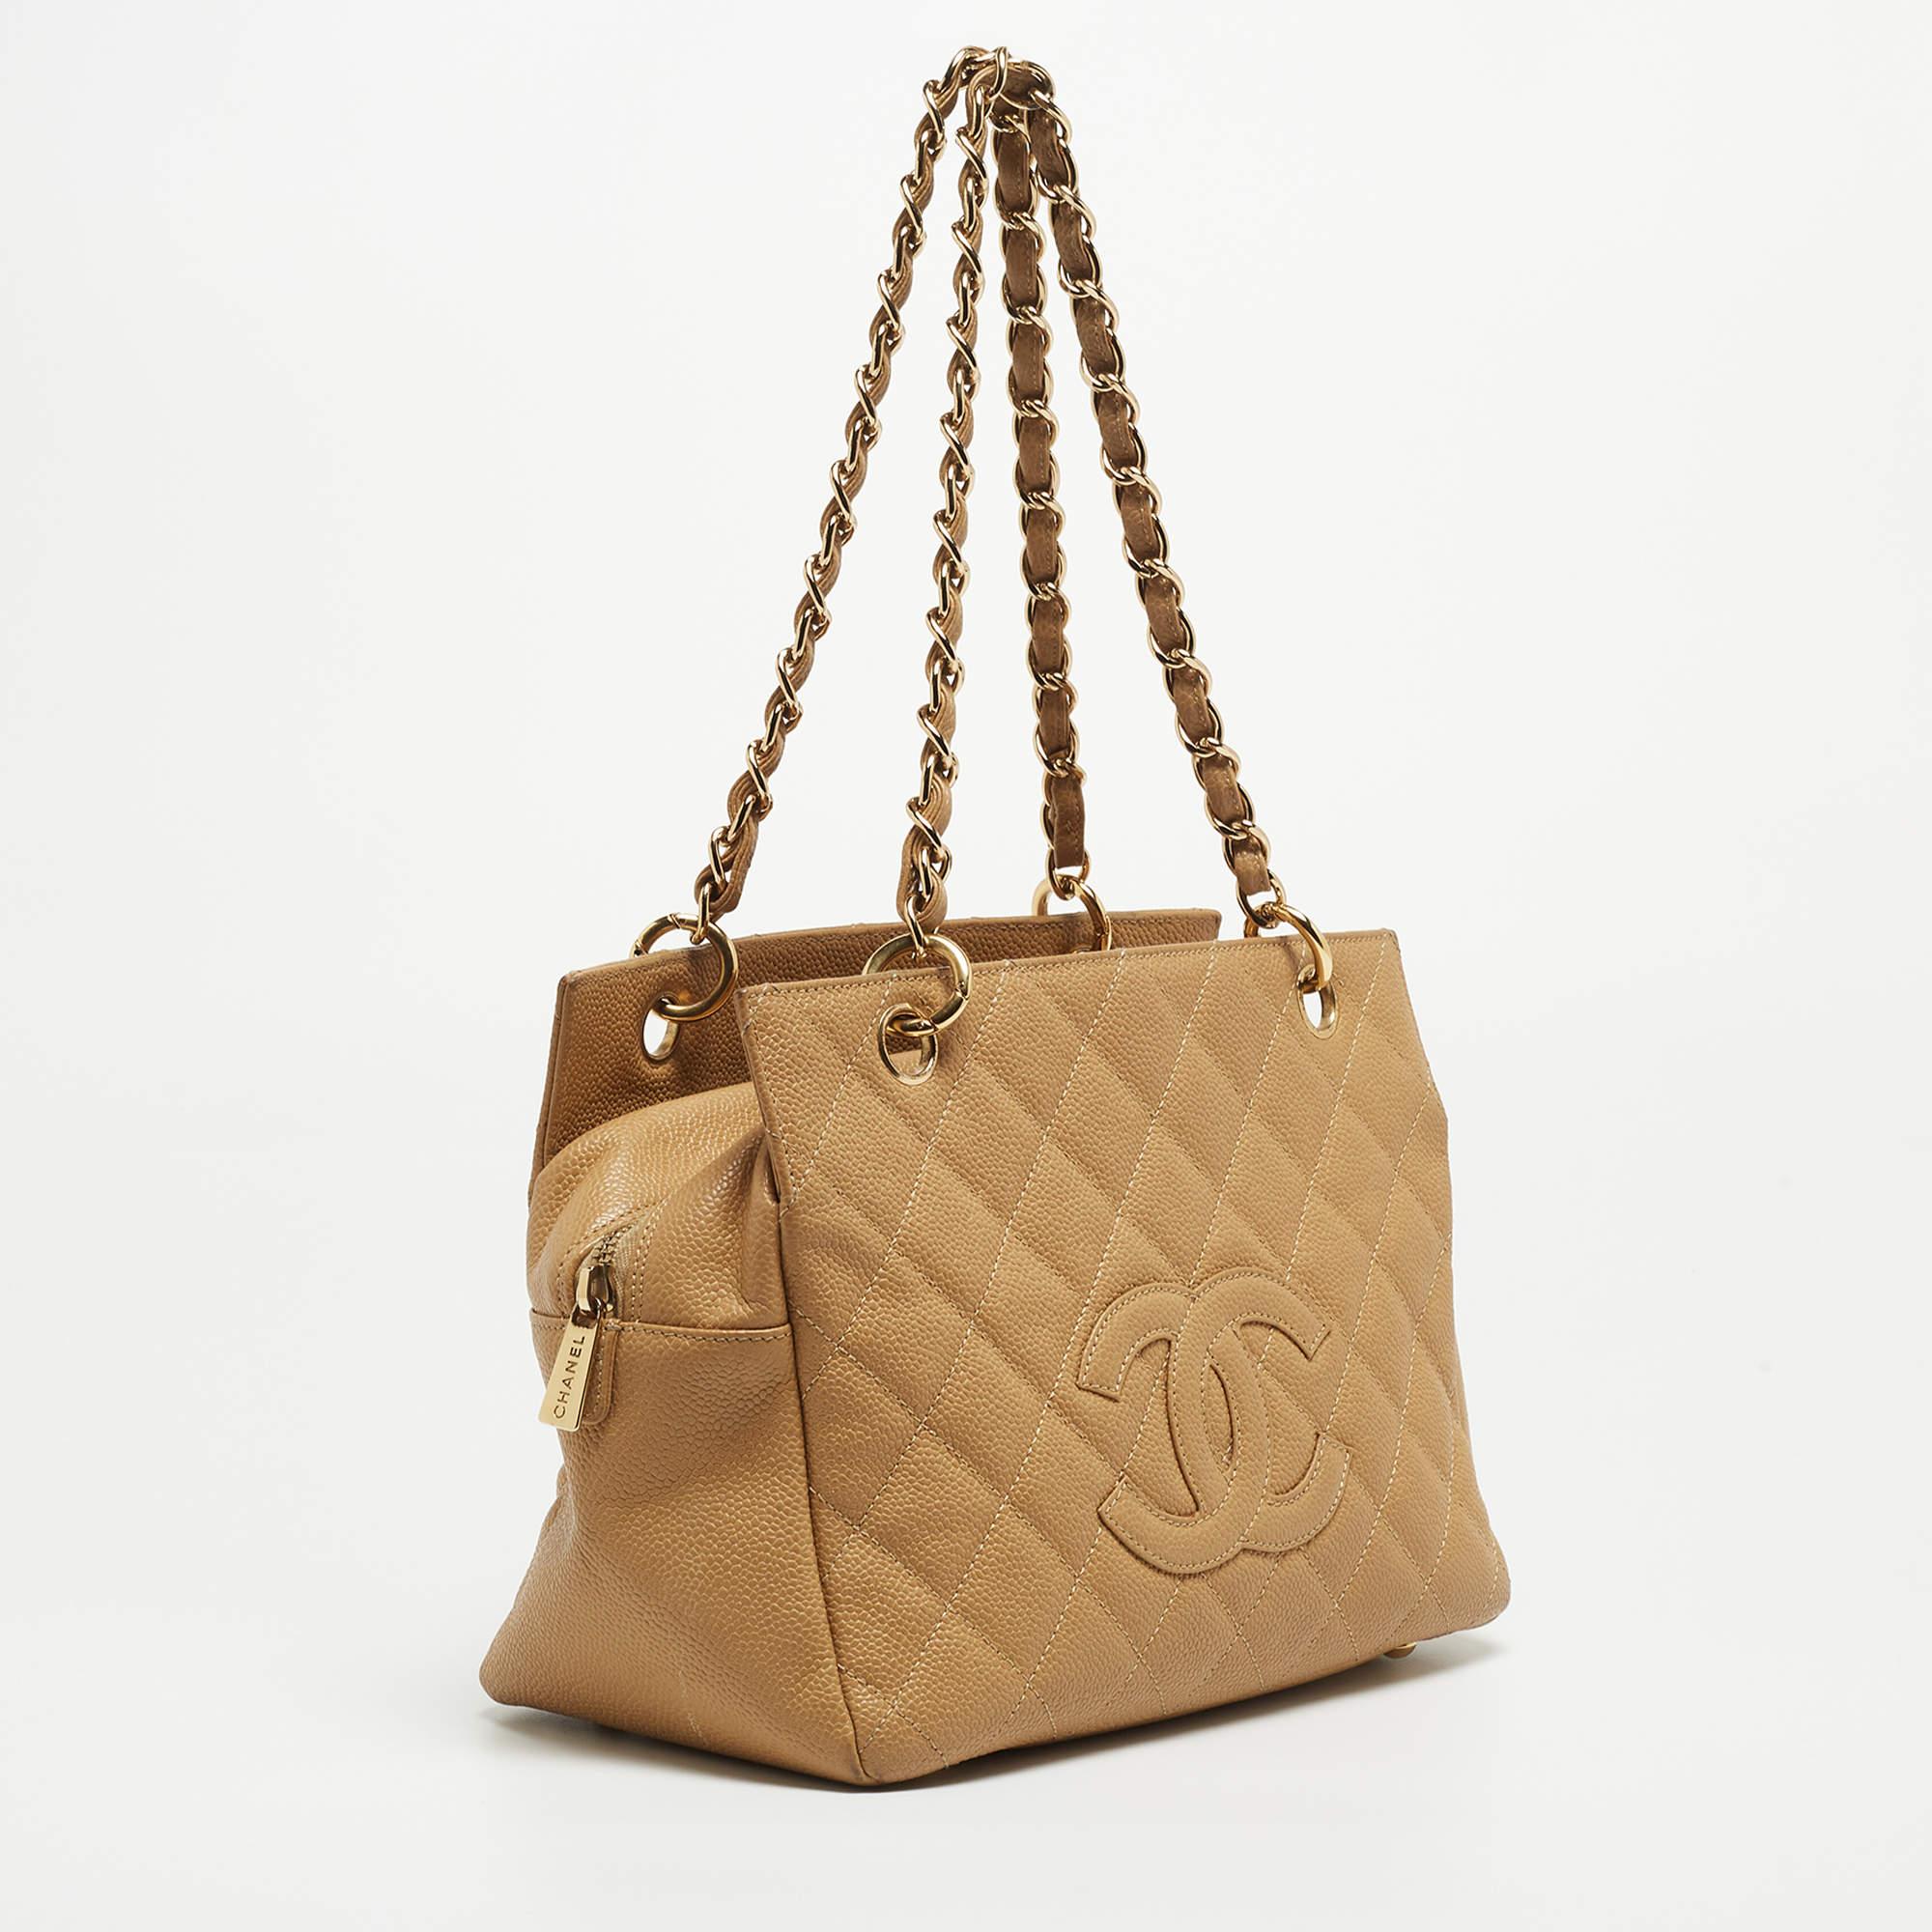 Women's Chanel Beige Quilted Caviar Leather Petite Timeless Shopper Tote